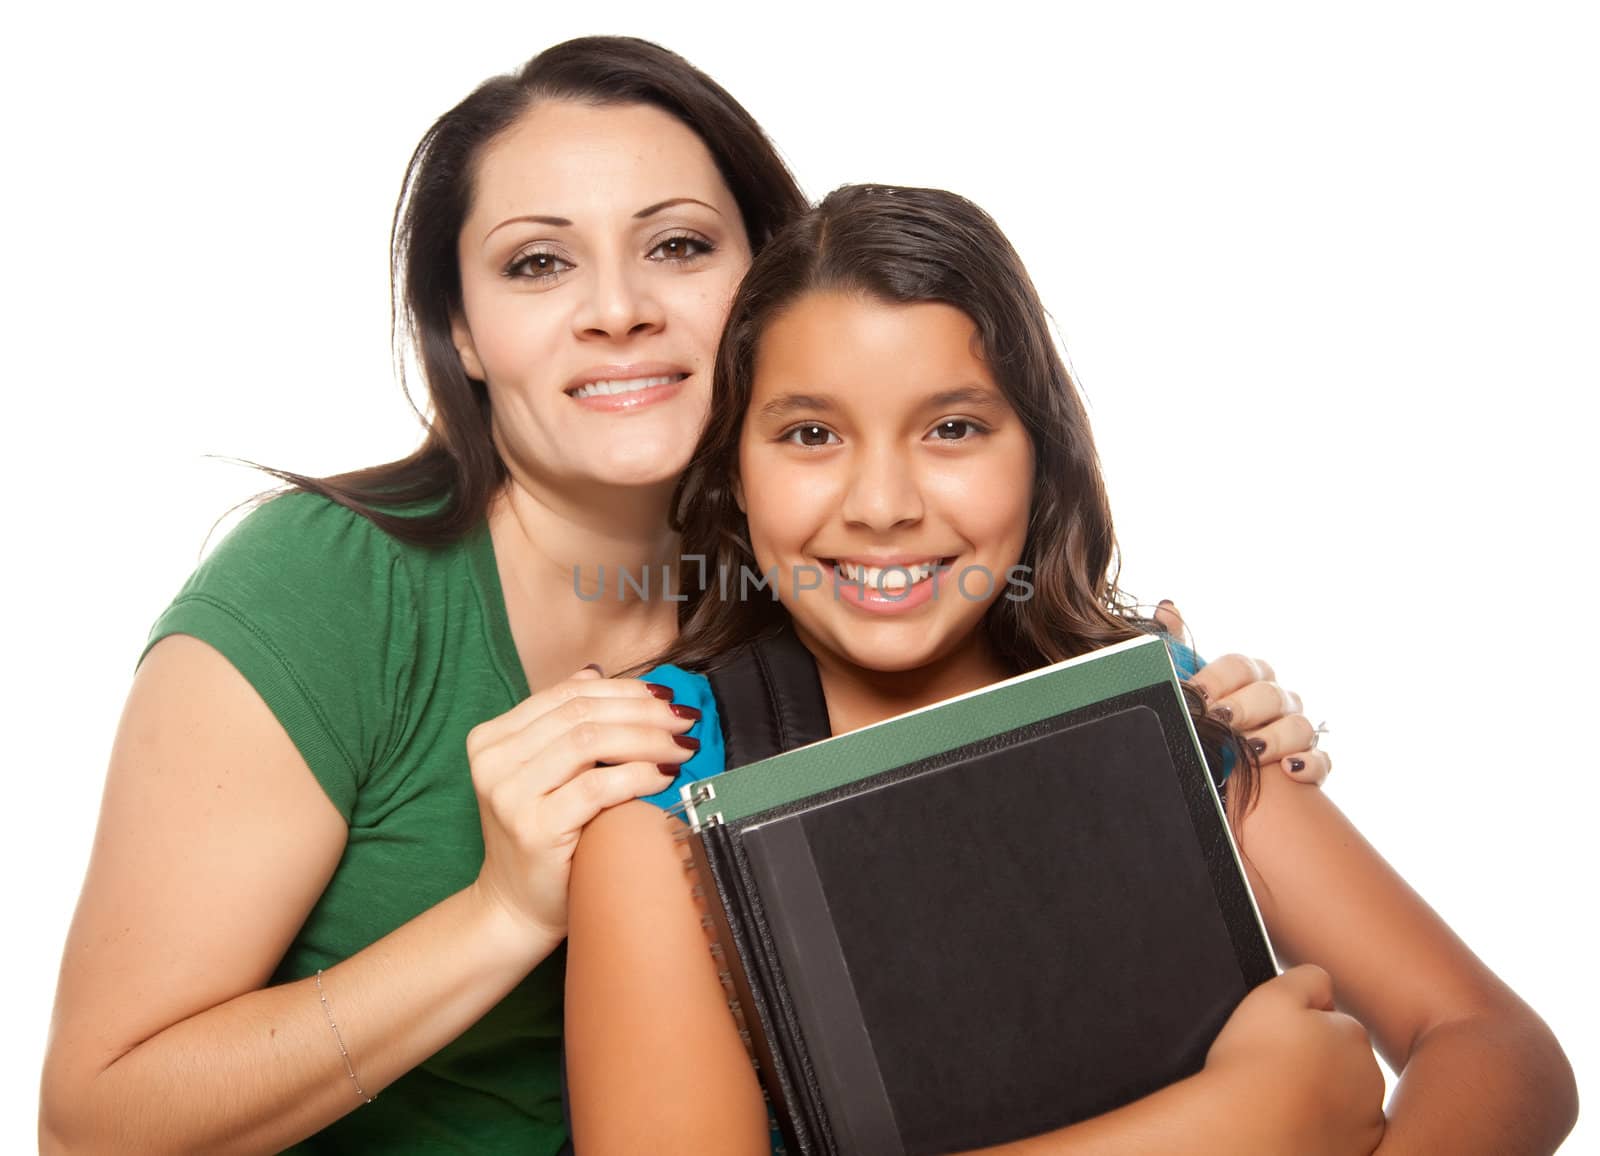 Hispanic Mother and Daughter Ready for School by Feverpitched